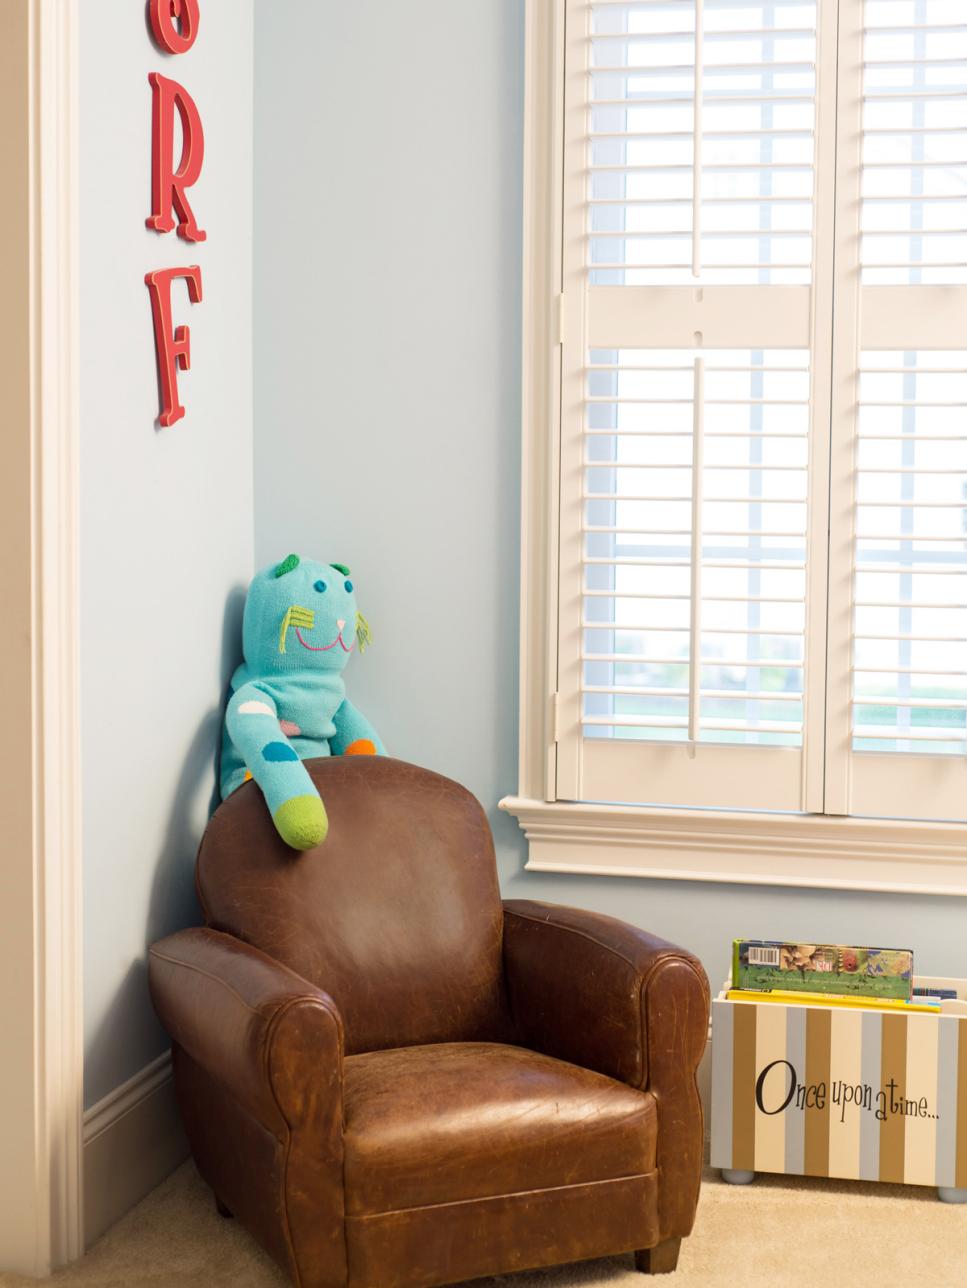 Brown Leather Chair in Kid's Room